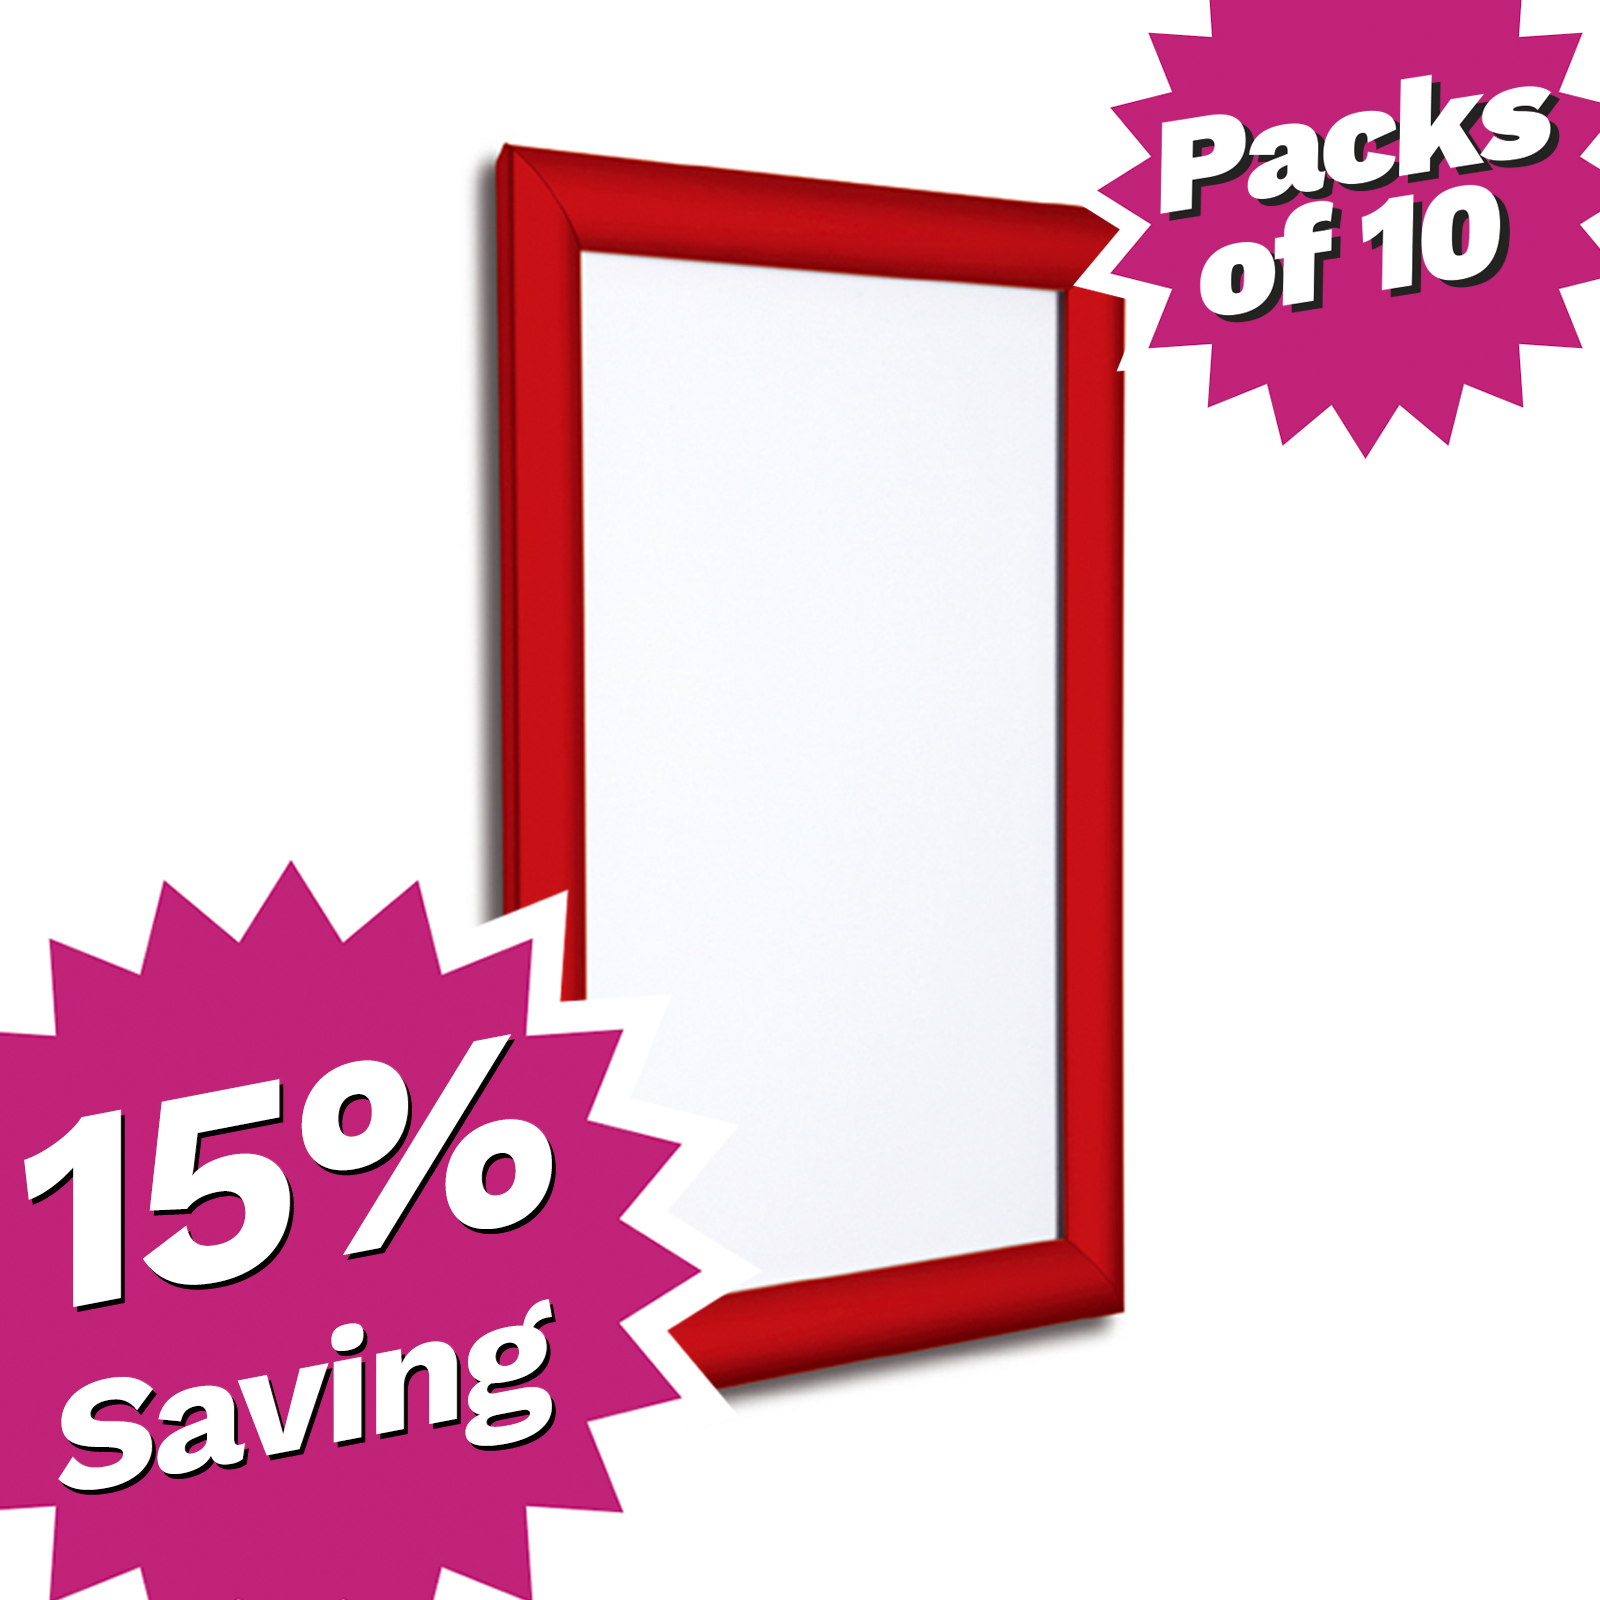 Red Love Frame Discount Promotion